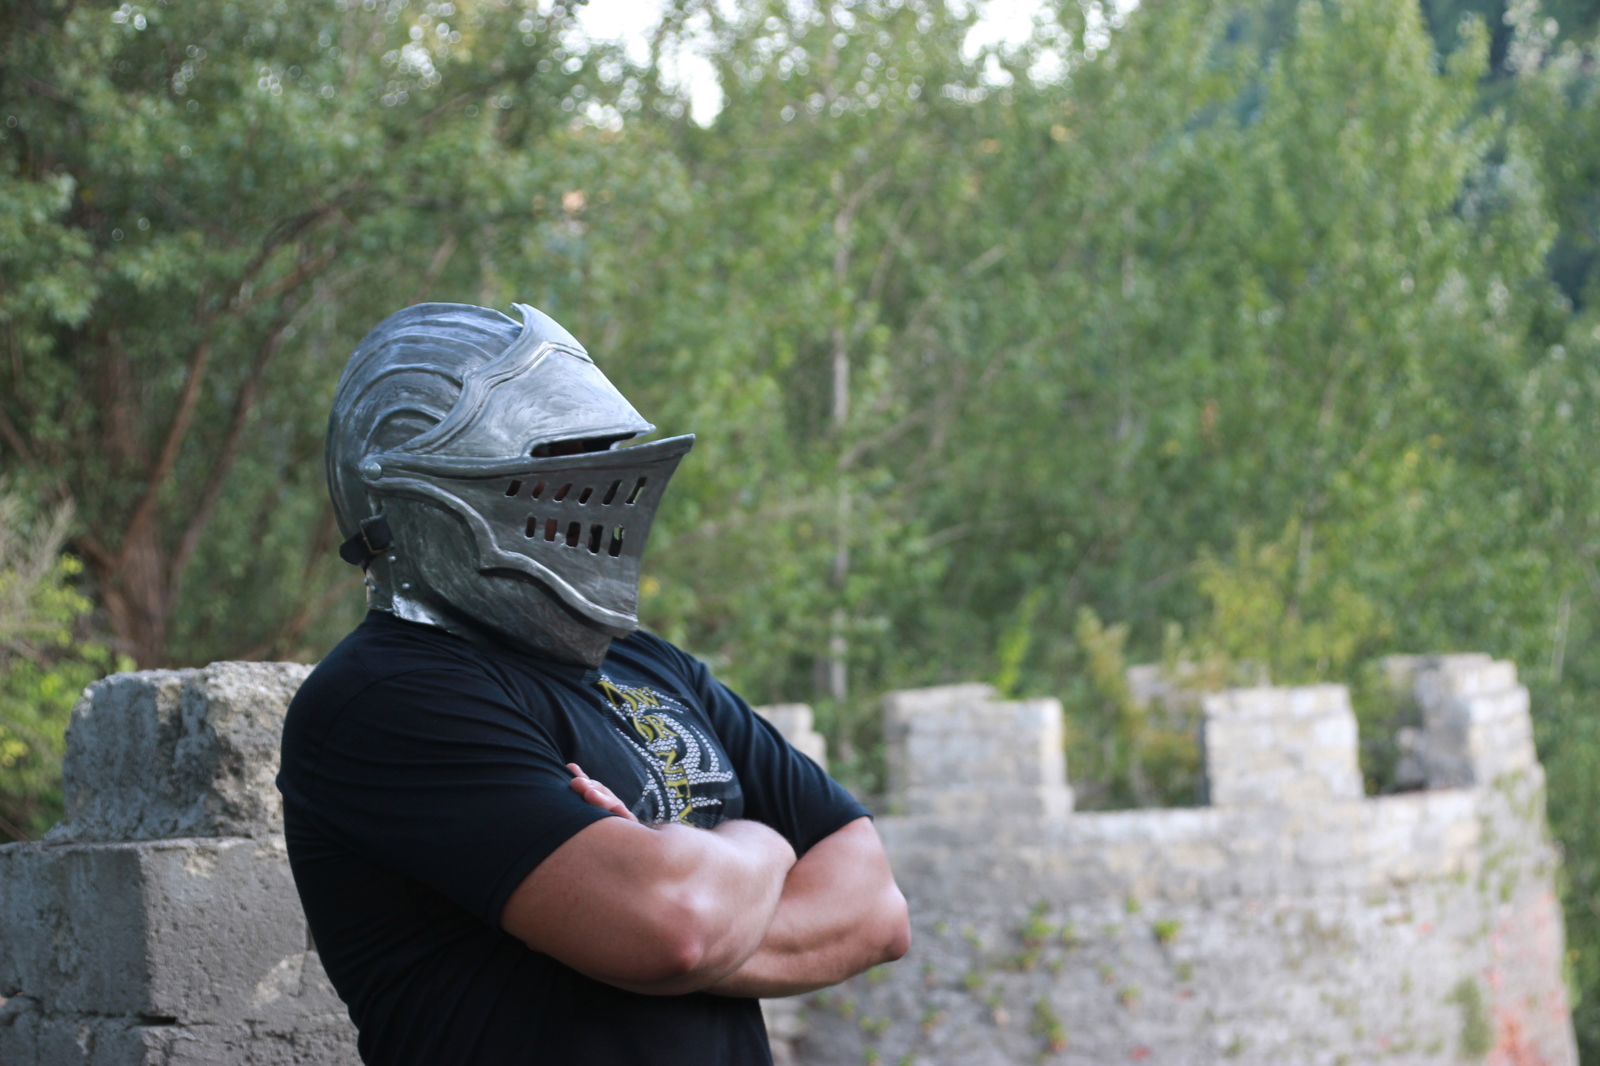 Do-it-yourself elite knight helmet from the game Dark Souls. R craft - My, Craft, Longpost, Needlework with process, Dark souls, Helmet, Cosplay, With your own hands, Video